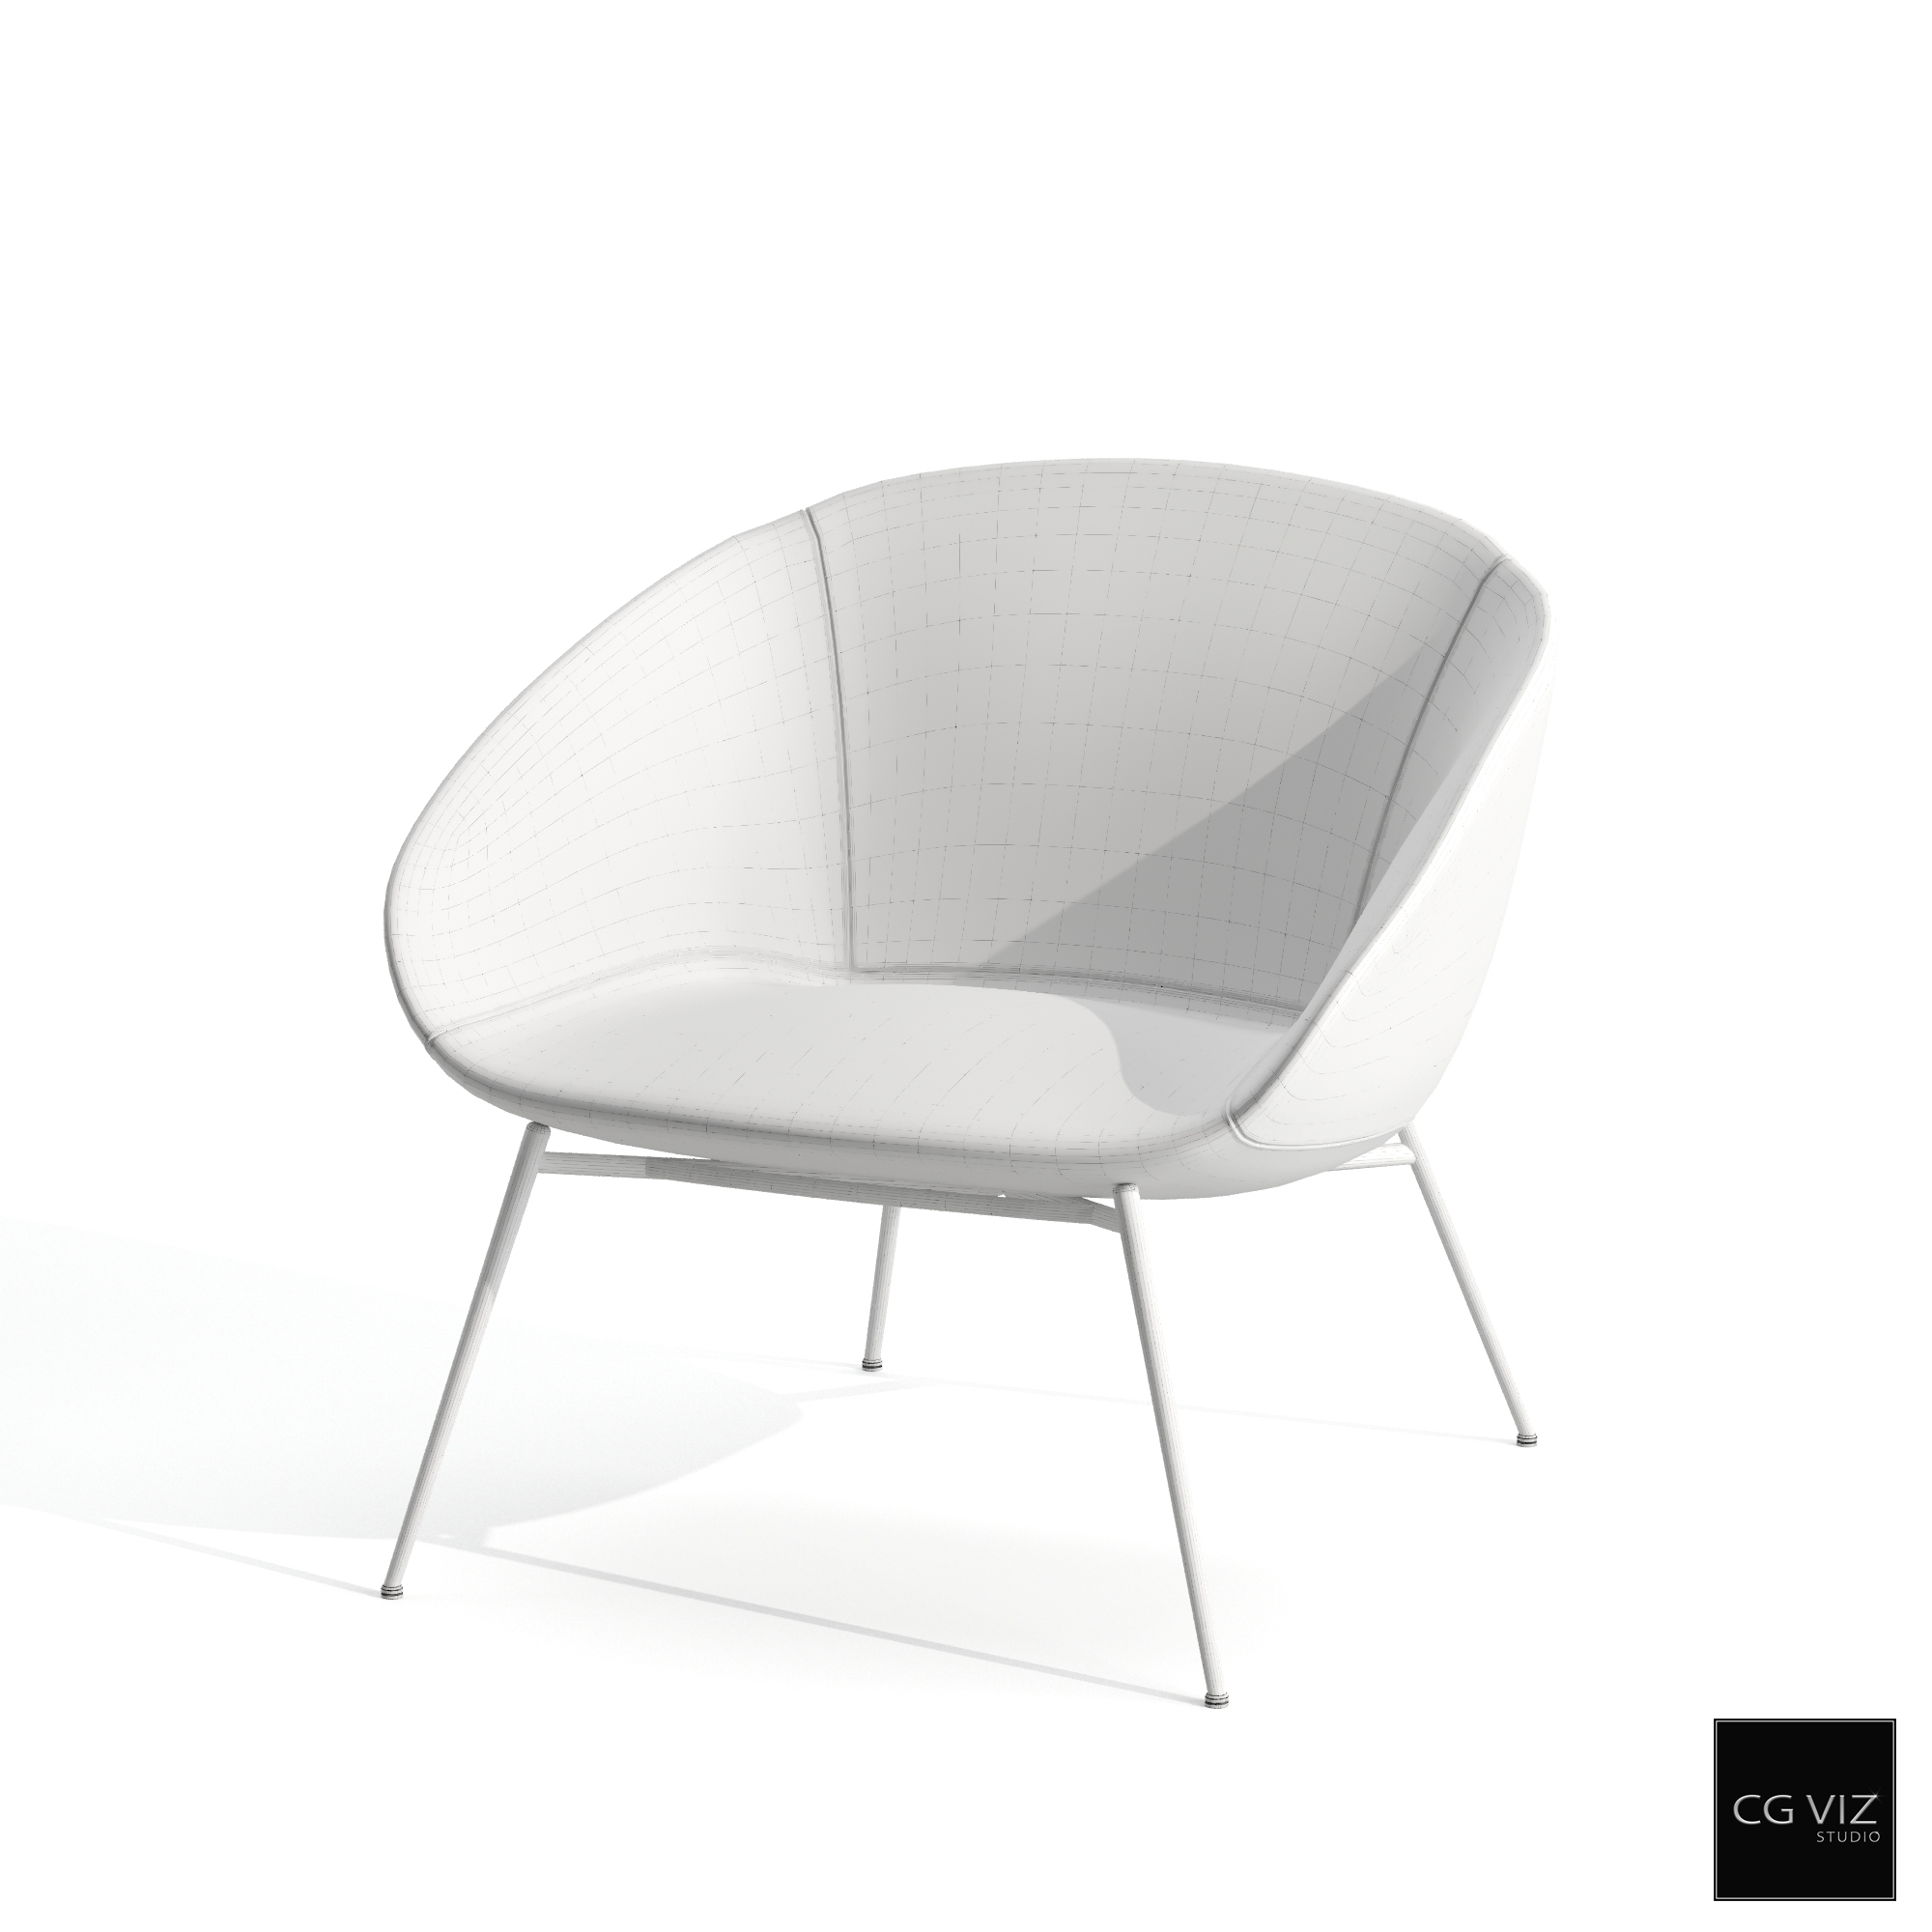 Wireframe View of Calligaris Love Lounge Chair 3D Model